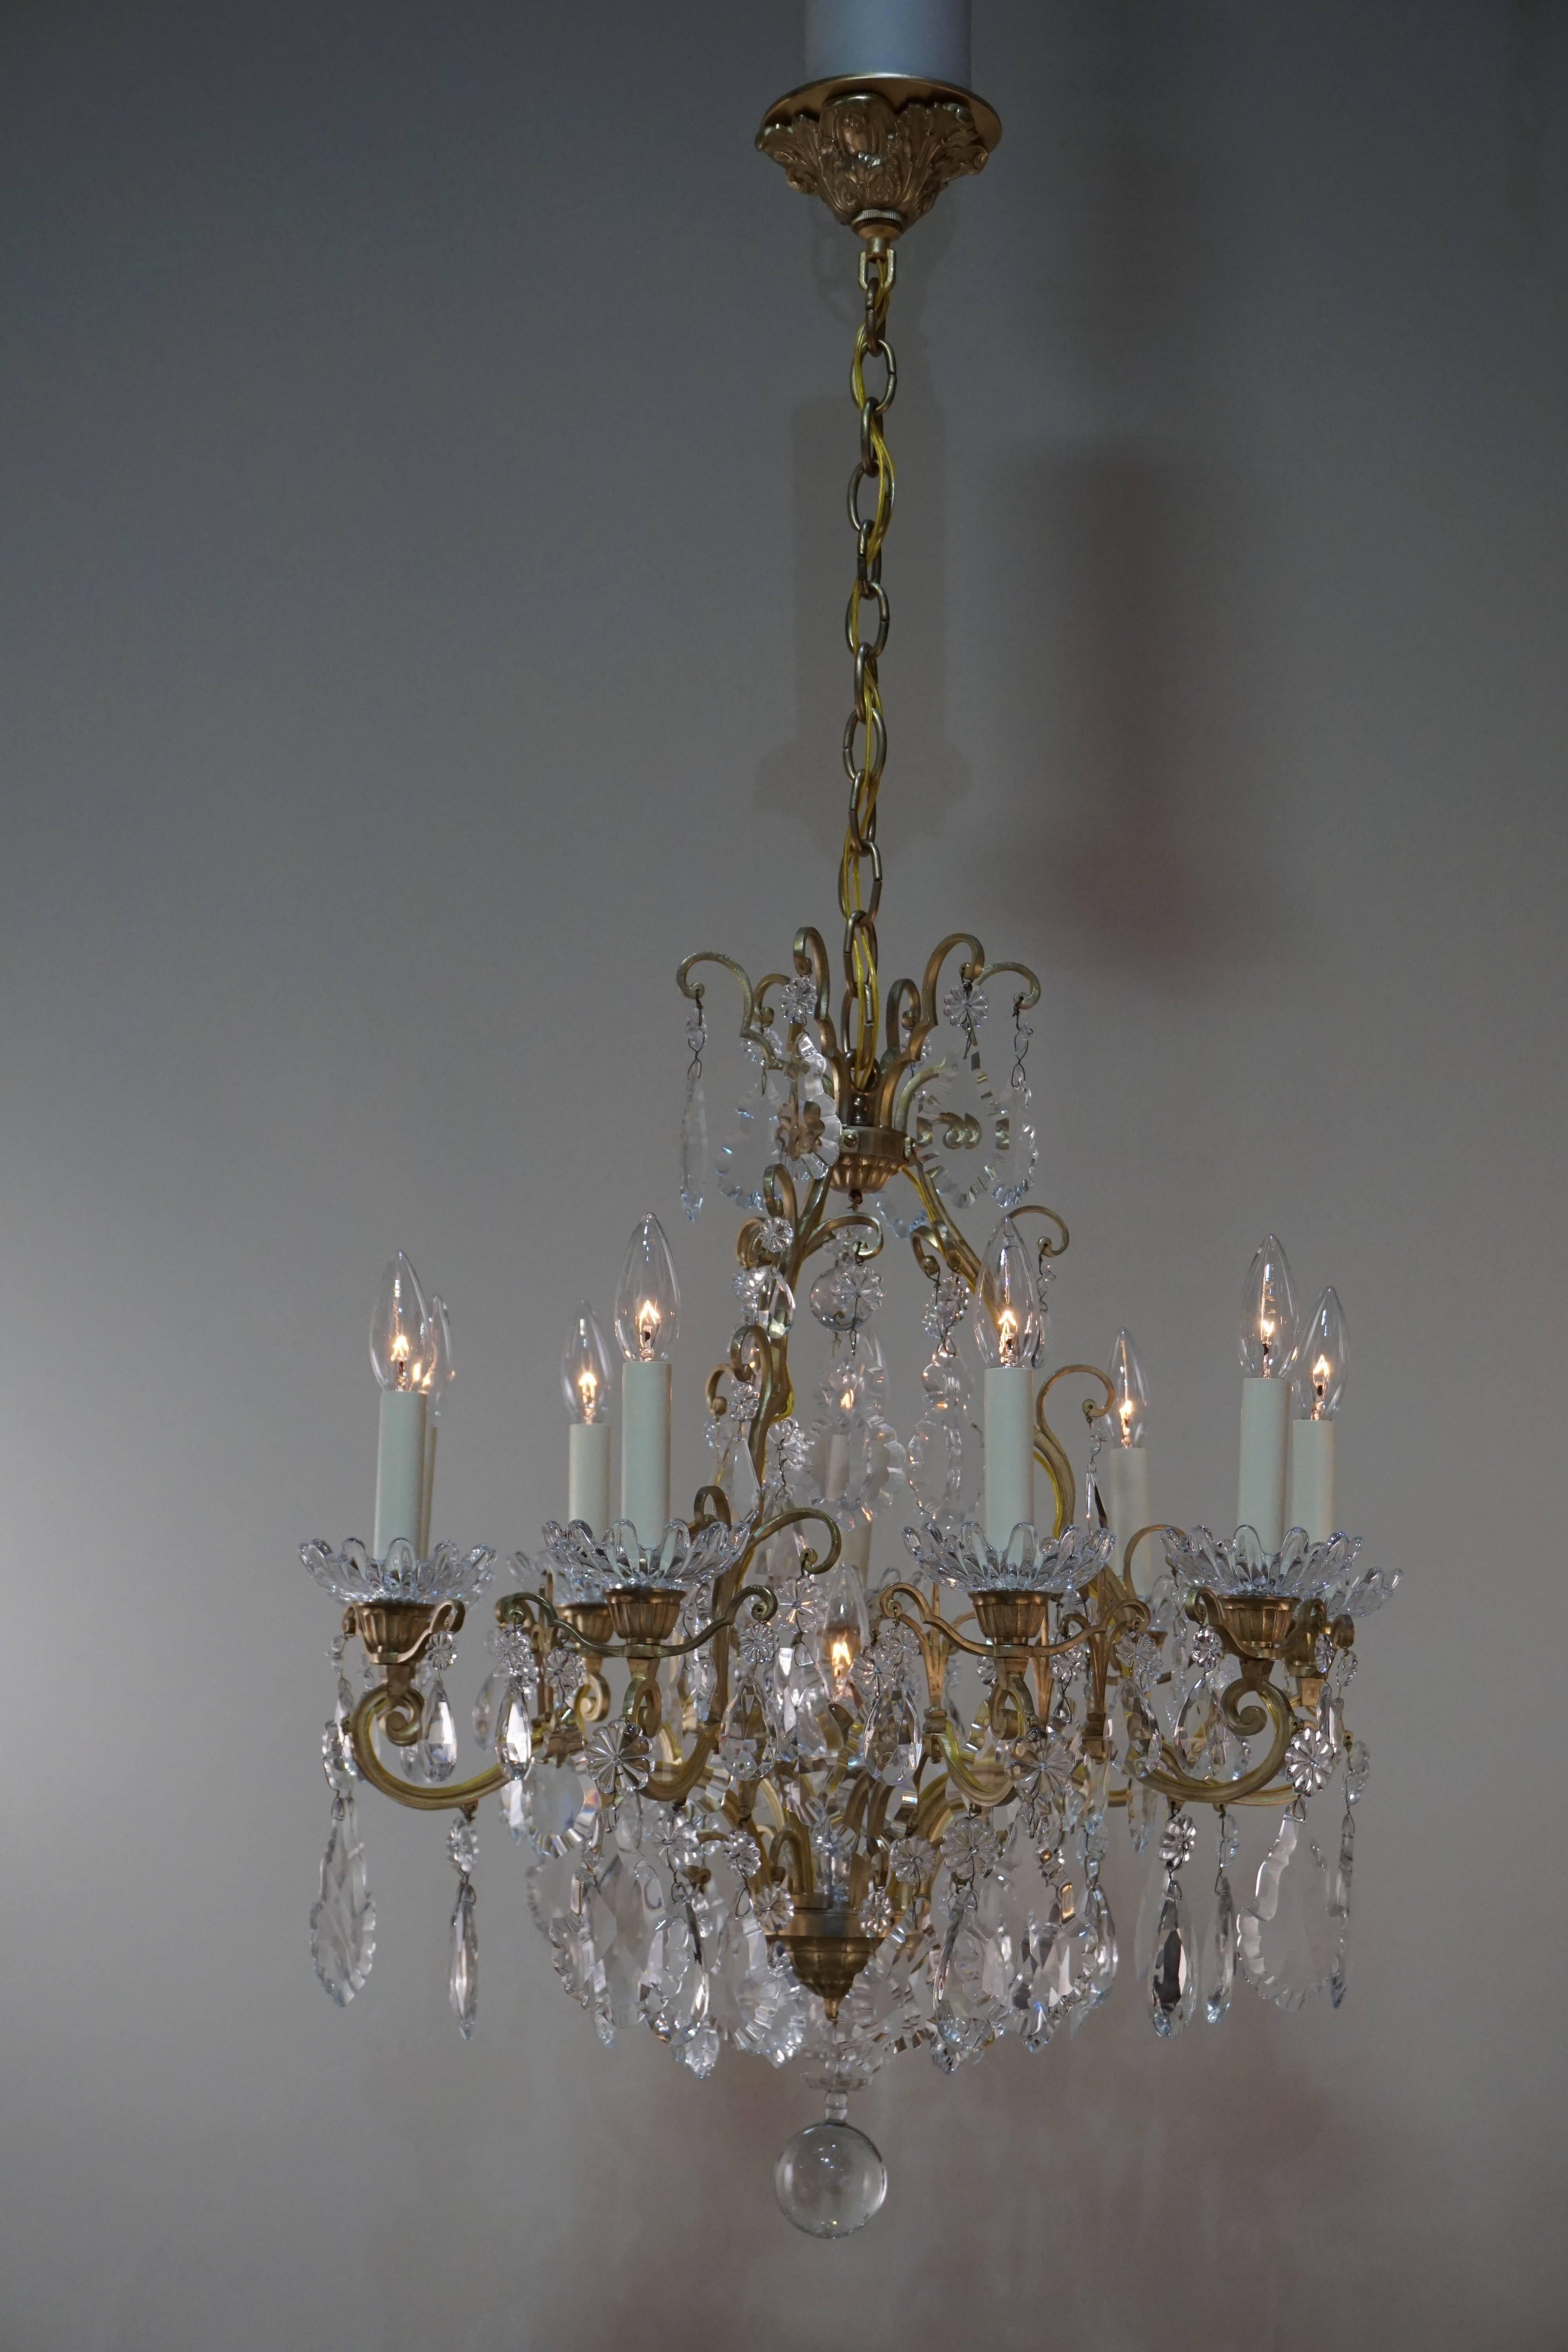 Elegant ten-light signed crystal chandelier with beautiful bronze frame work by Baccarat.
Can be fully installed with total of 30